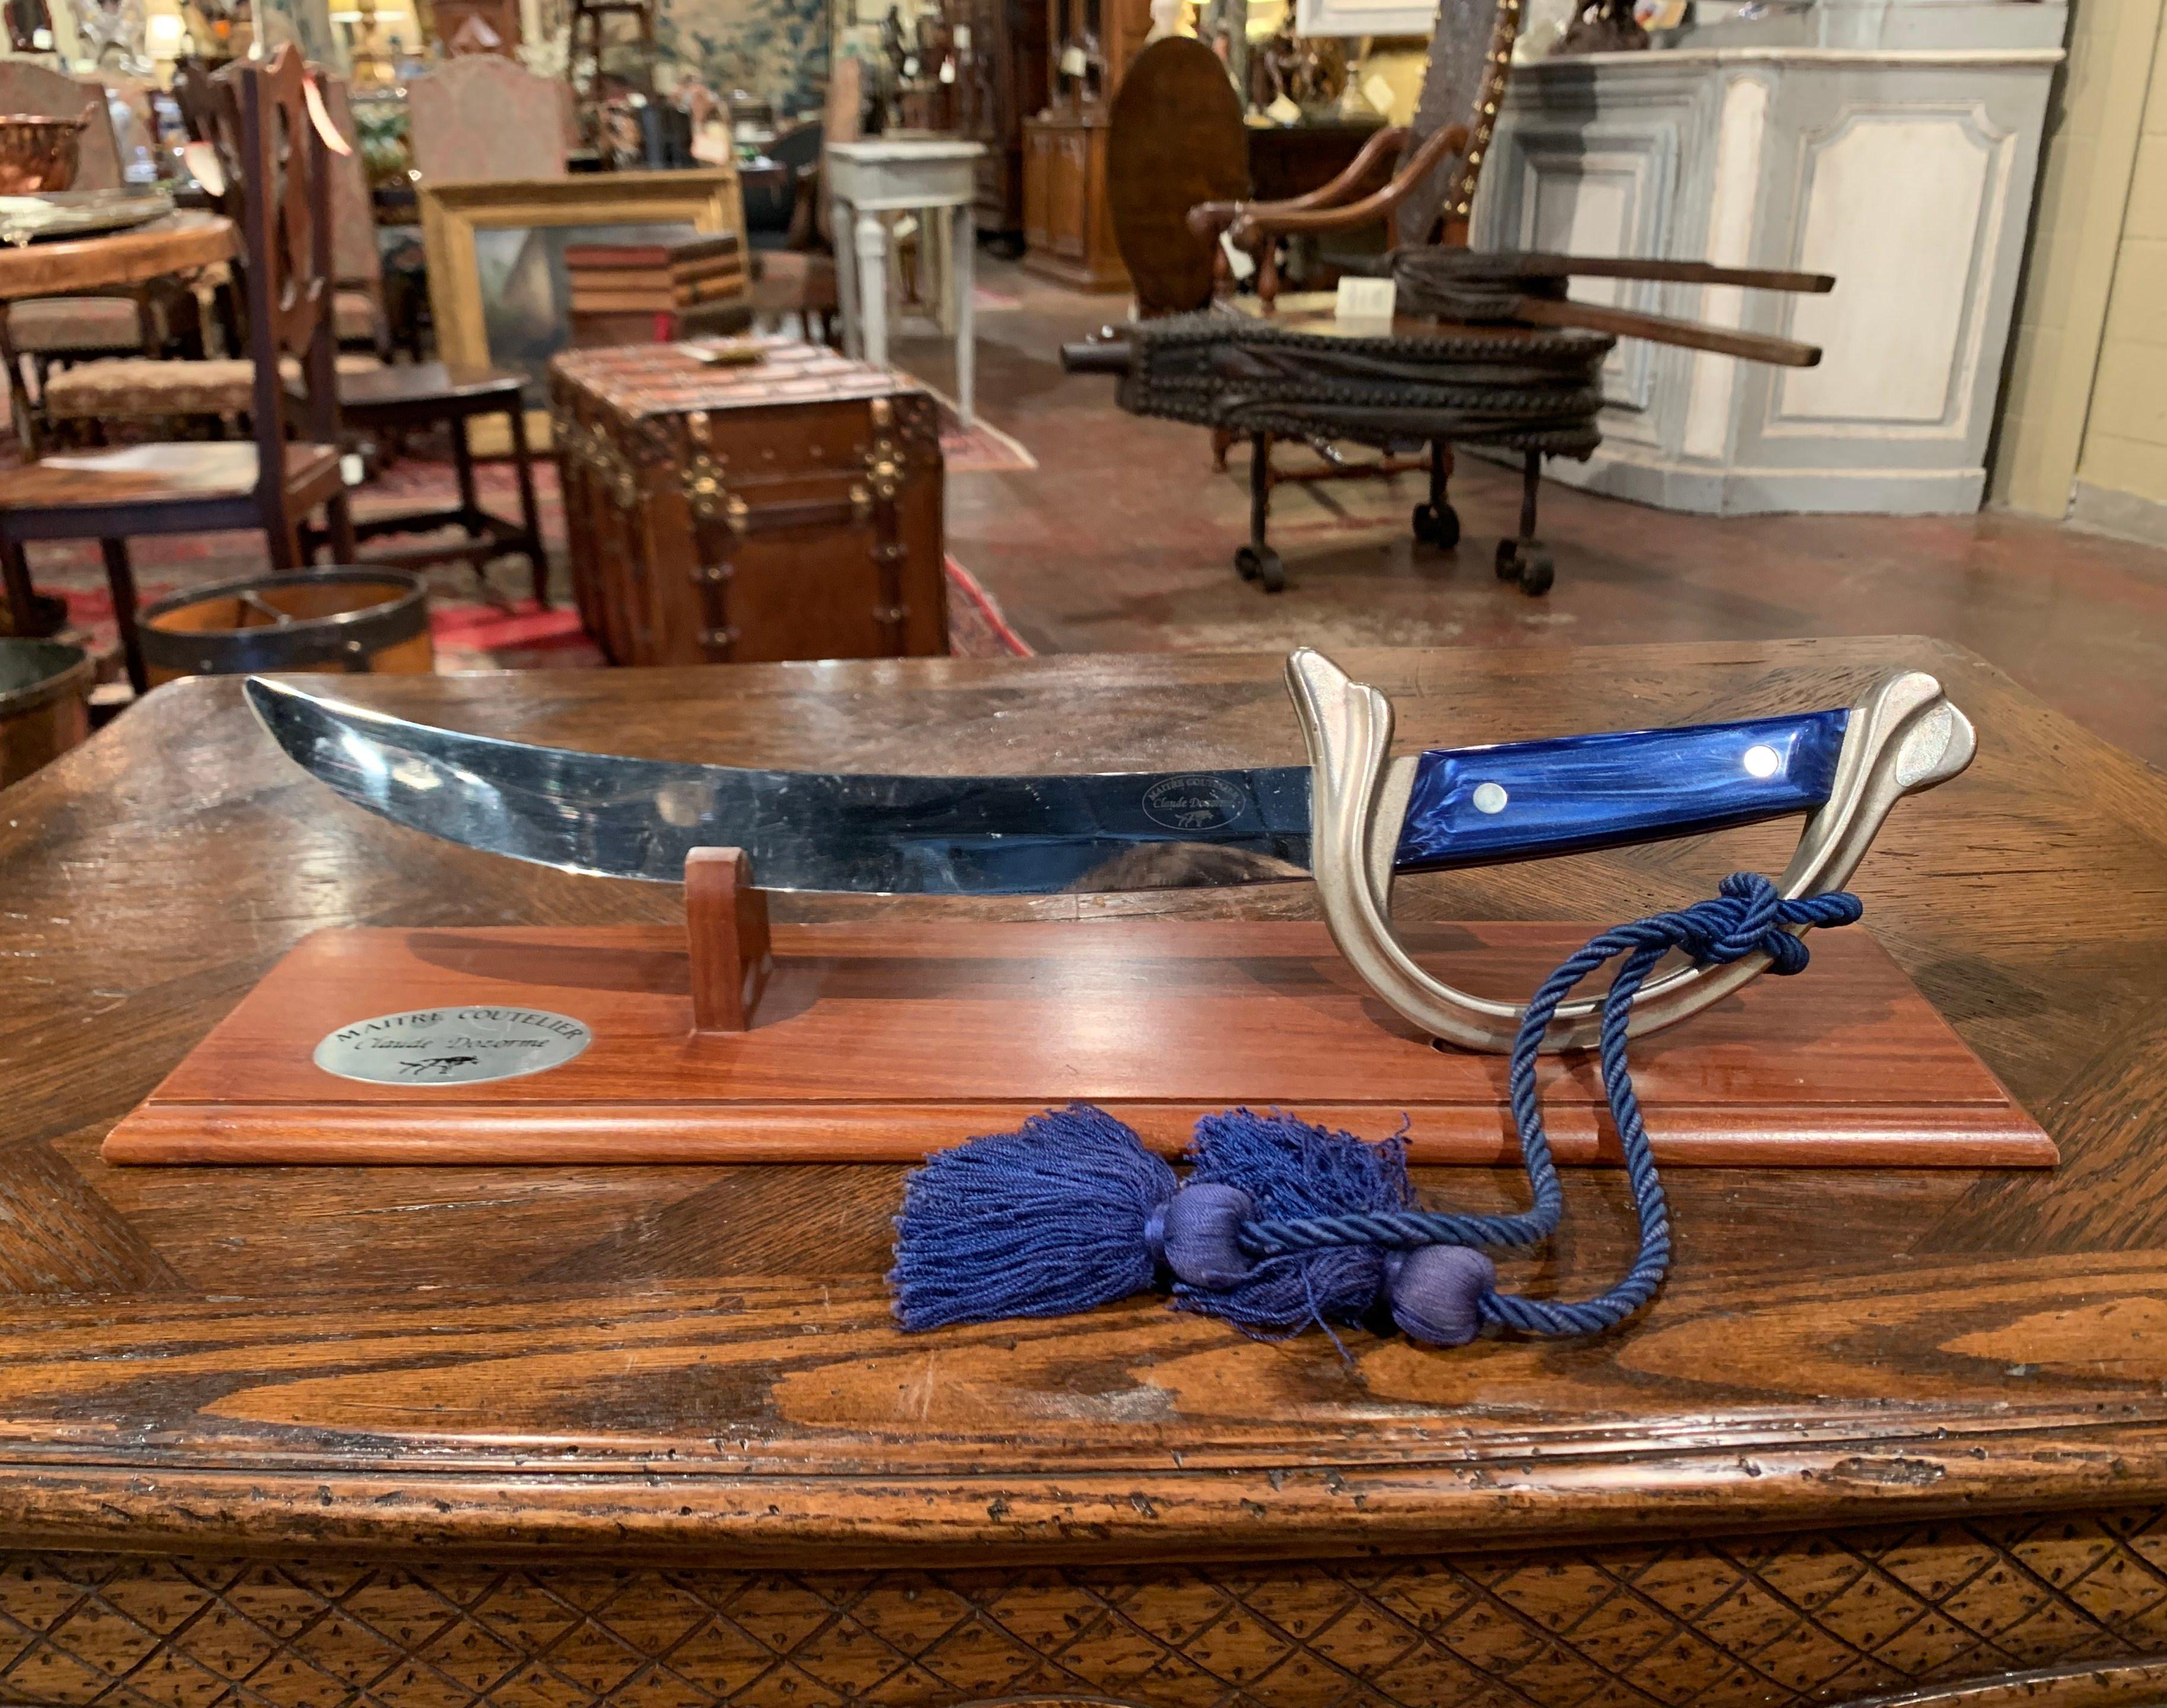 This vintage metal saber with blue handle and silvered guild was created in Thiers, France circa 1970 by Claude Dozorme, maitre coutelier. The large knife rests on a walnut Stand sighed by the company. The piece is in excellent condition with a rich